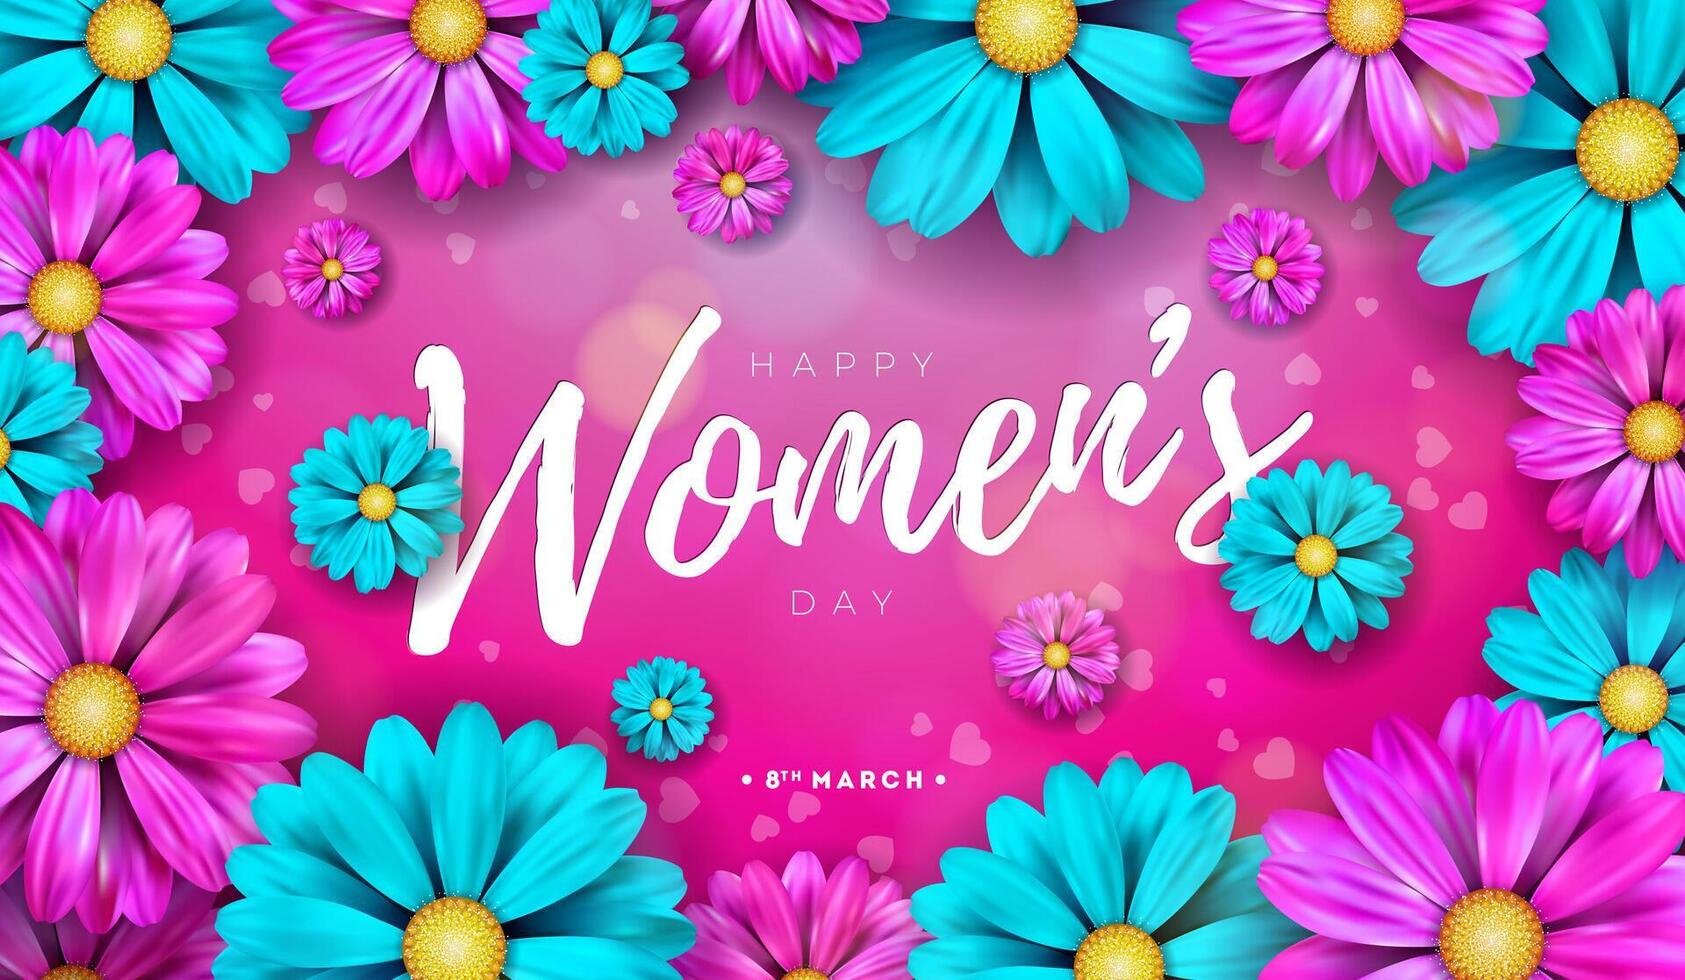 8 March. Happy Women's Day Floral Illustration. International Womens Day Vector Design with Spring Flower on Light Background. Woman or Mother Day Theme Template for Flyer, Greeting Card, Web Banner